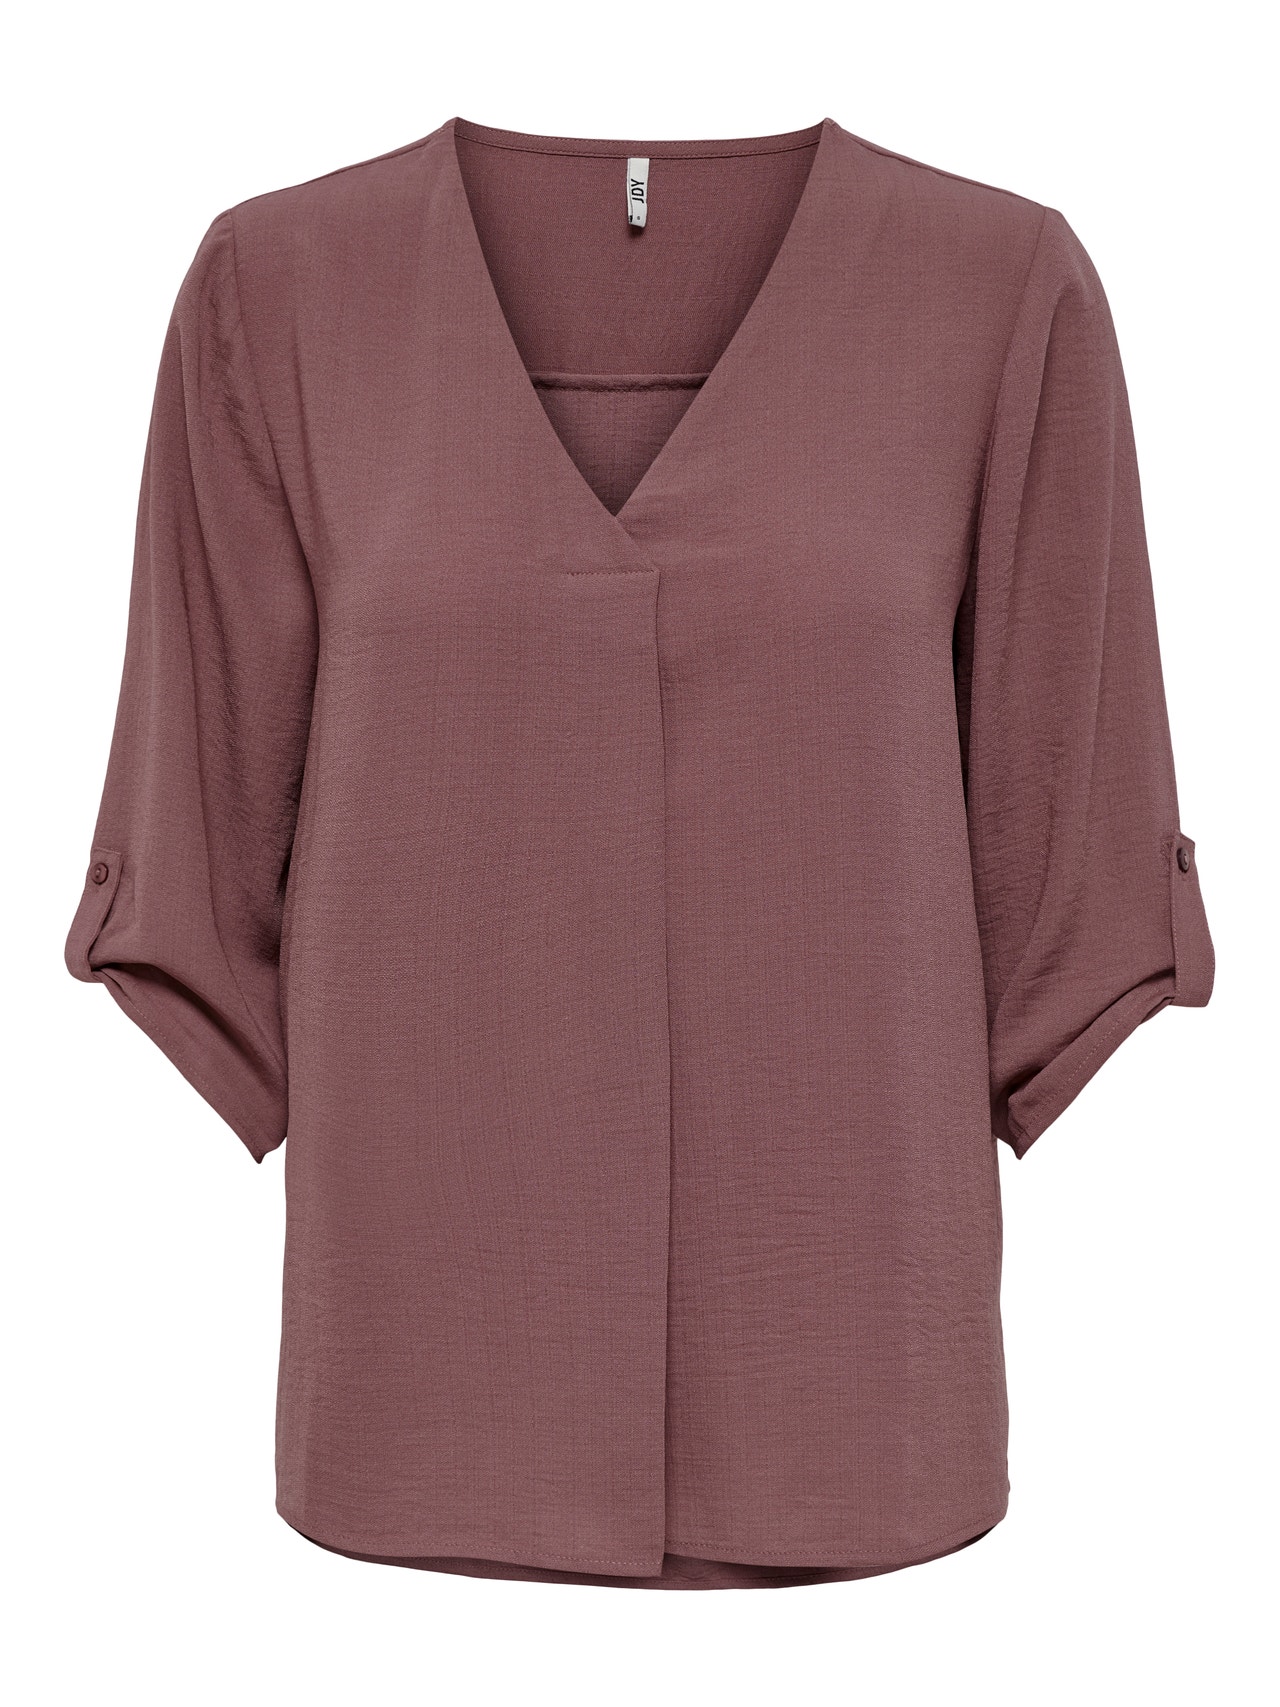 ONLY Loose Fit V-Neck Fold-up cuffs Volume sleeves Top -Rose Brown - 15226911